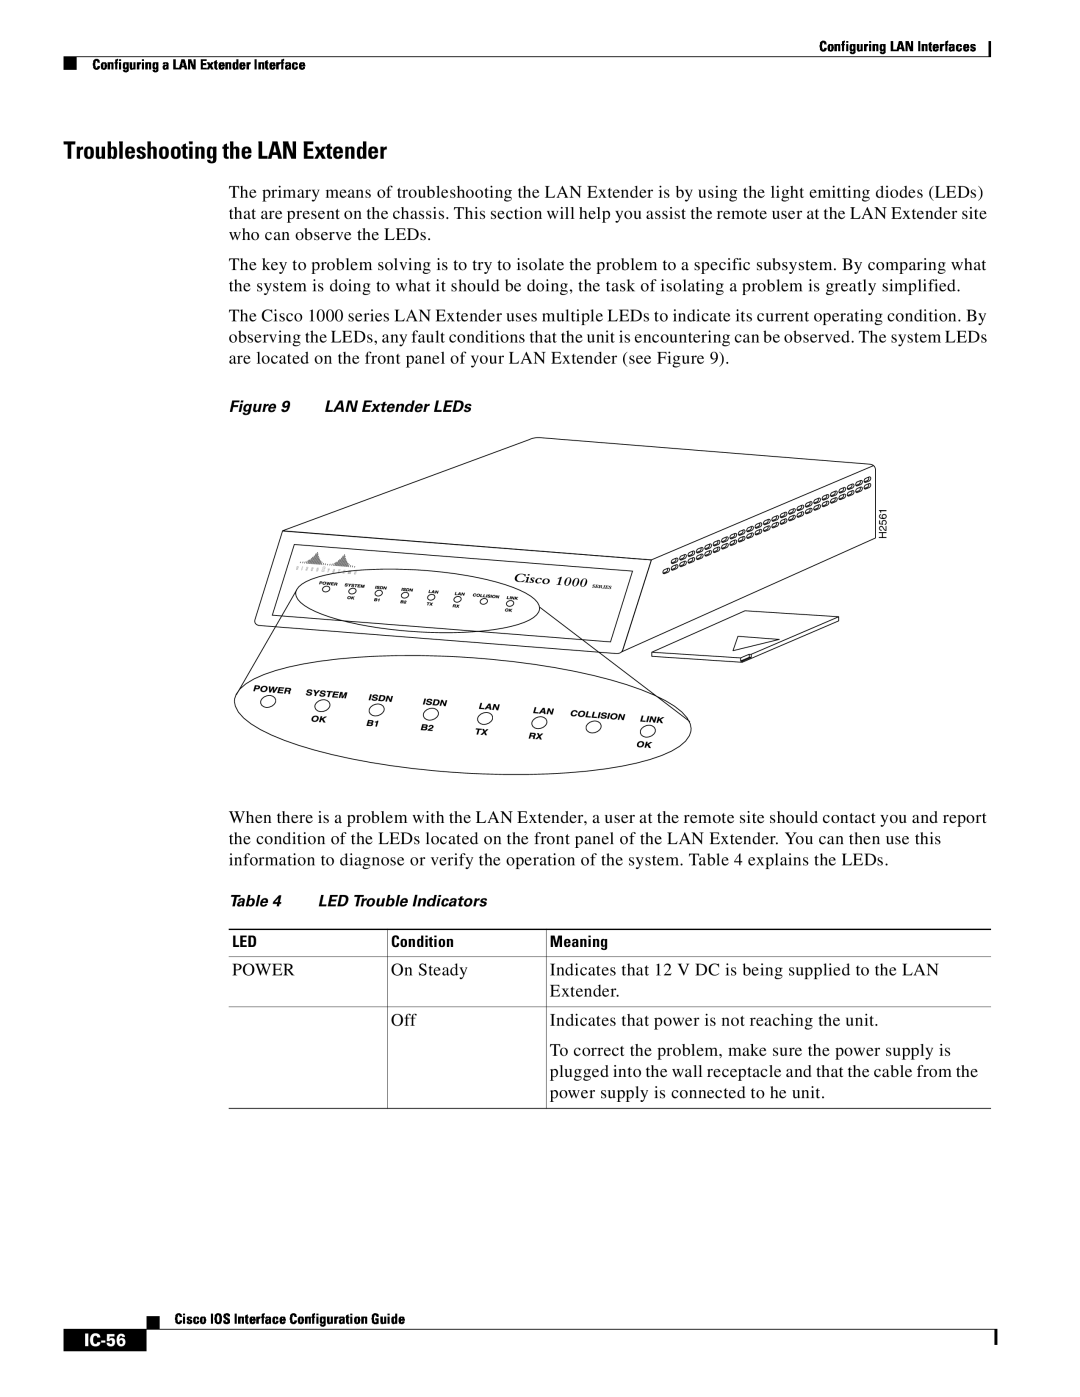 Cisco Systems IC-23 manual Troubleshooting the LAN Extender, IC-56 